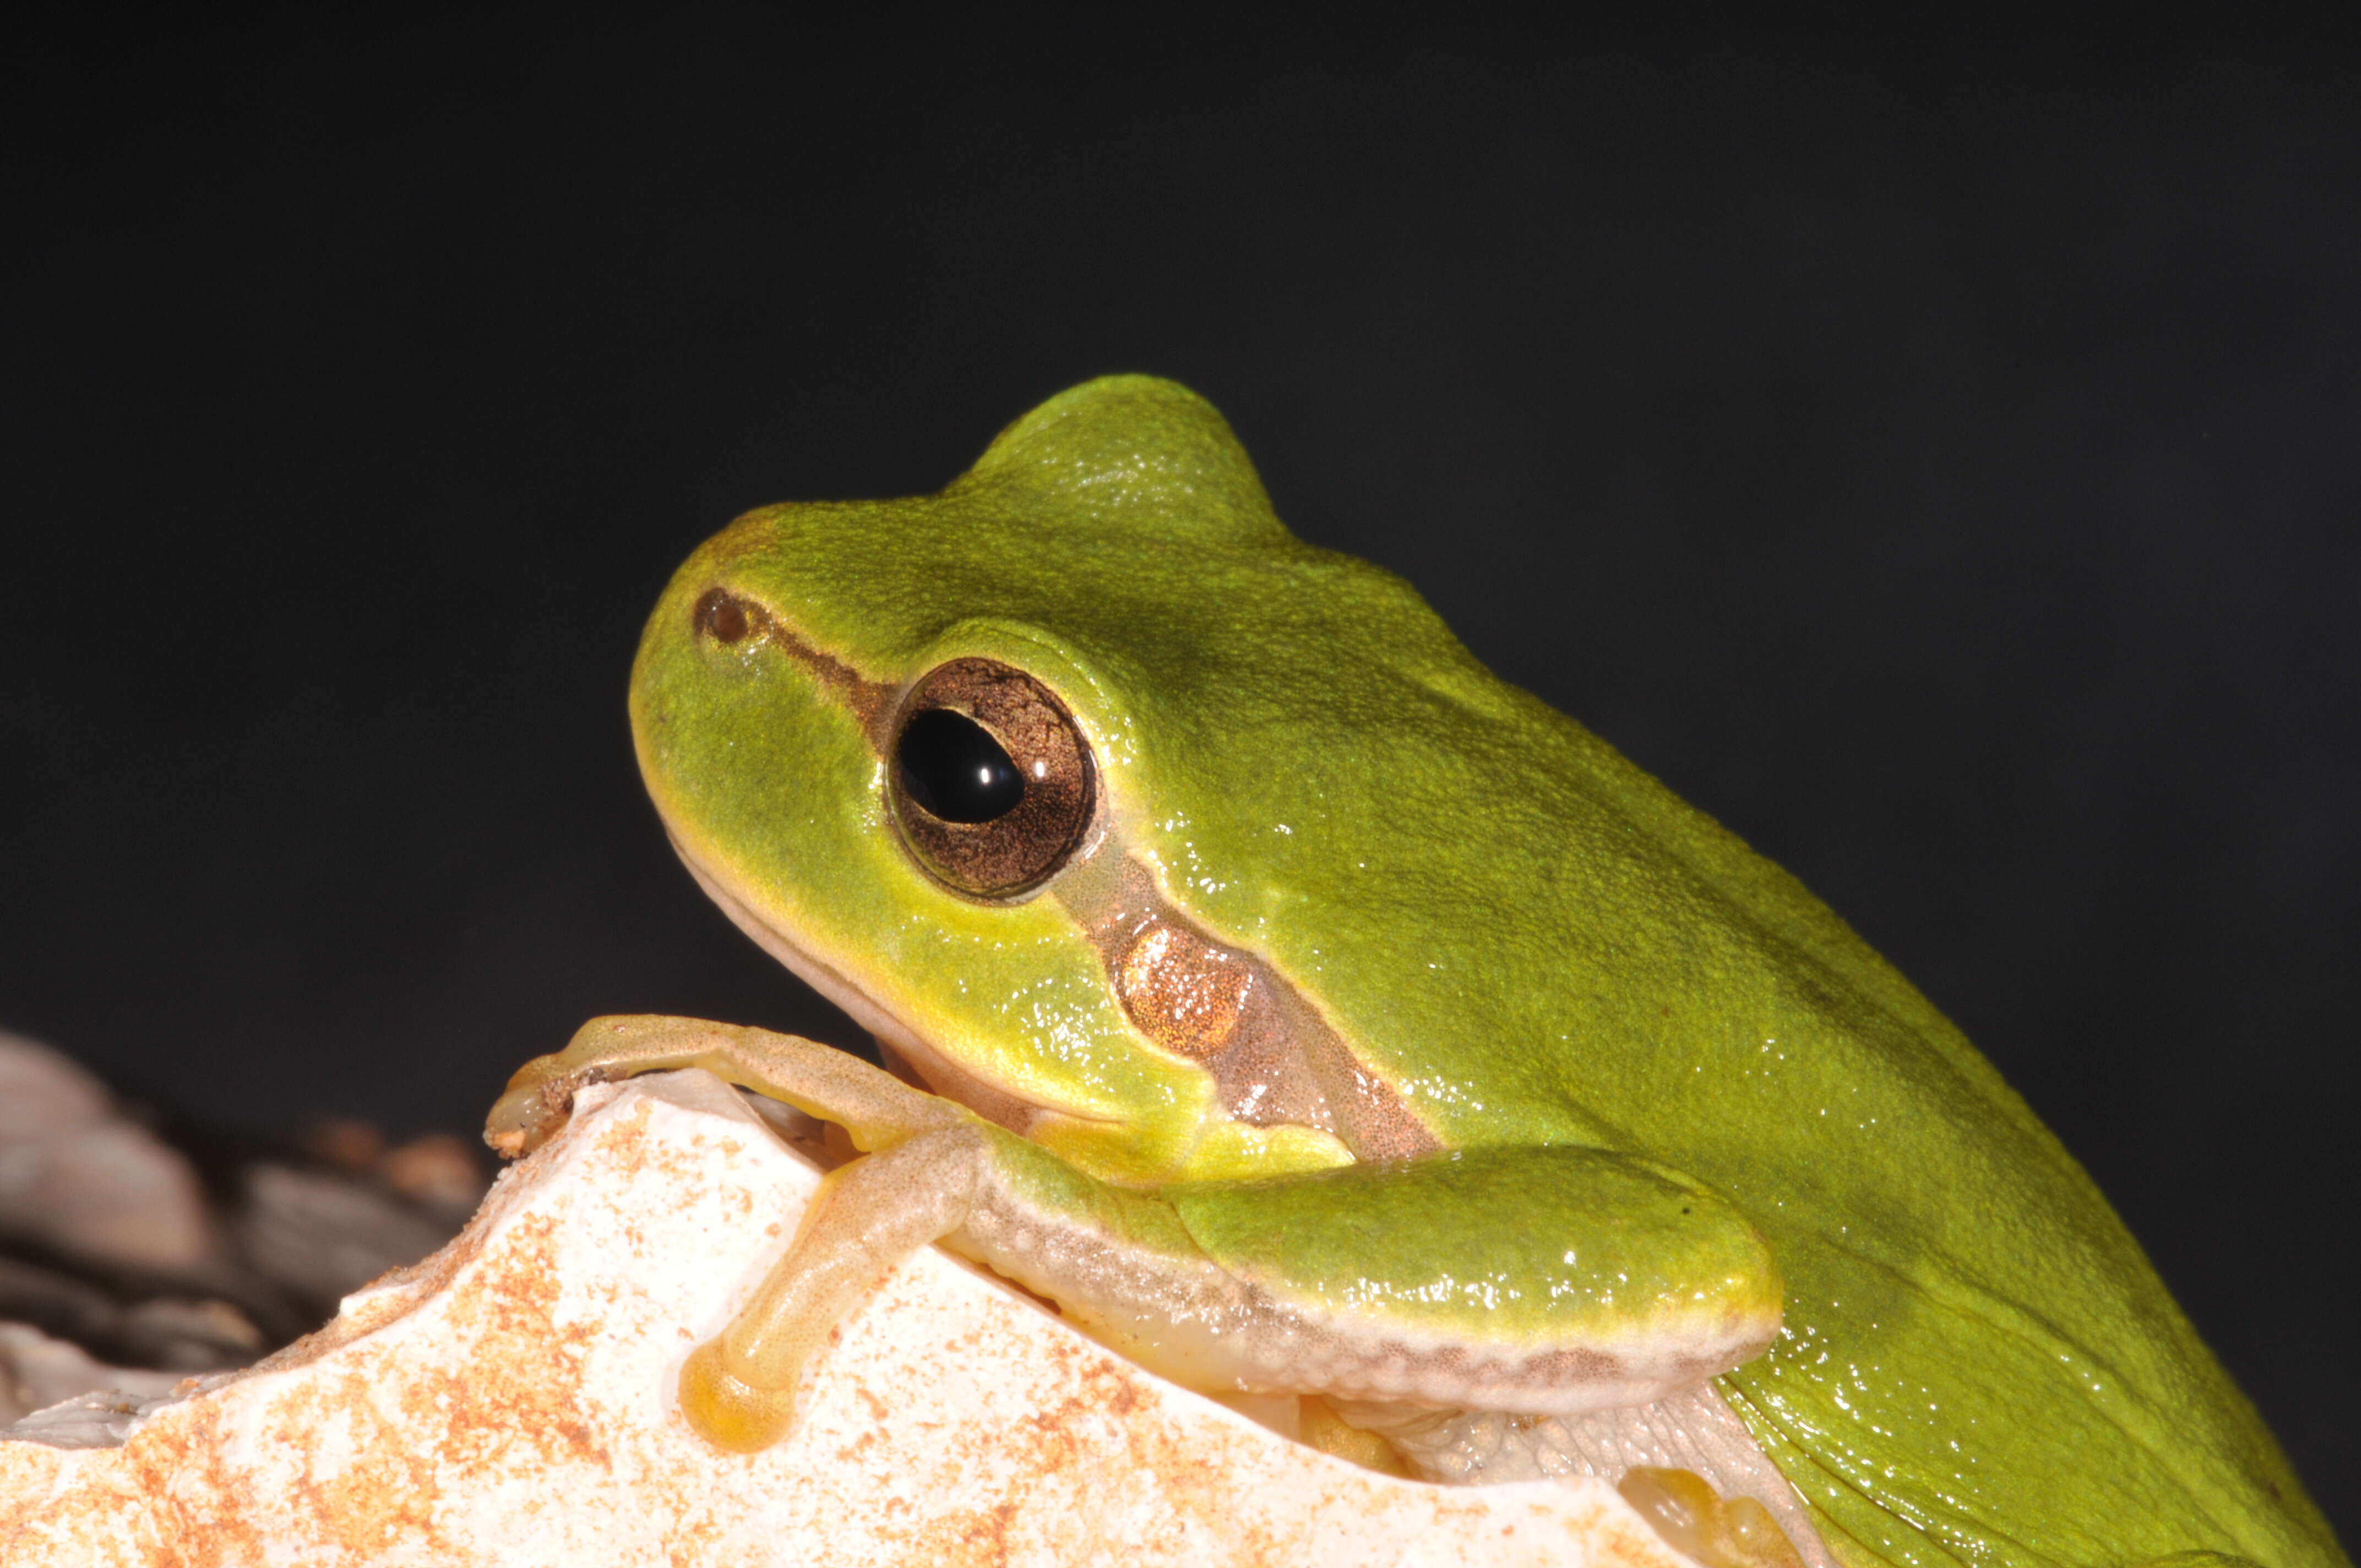 Image of Common tree frog